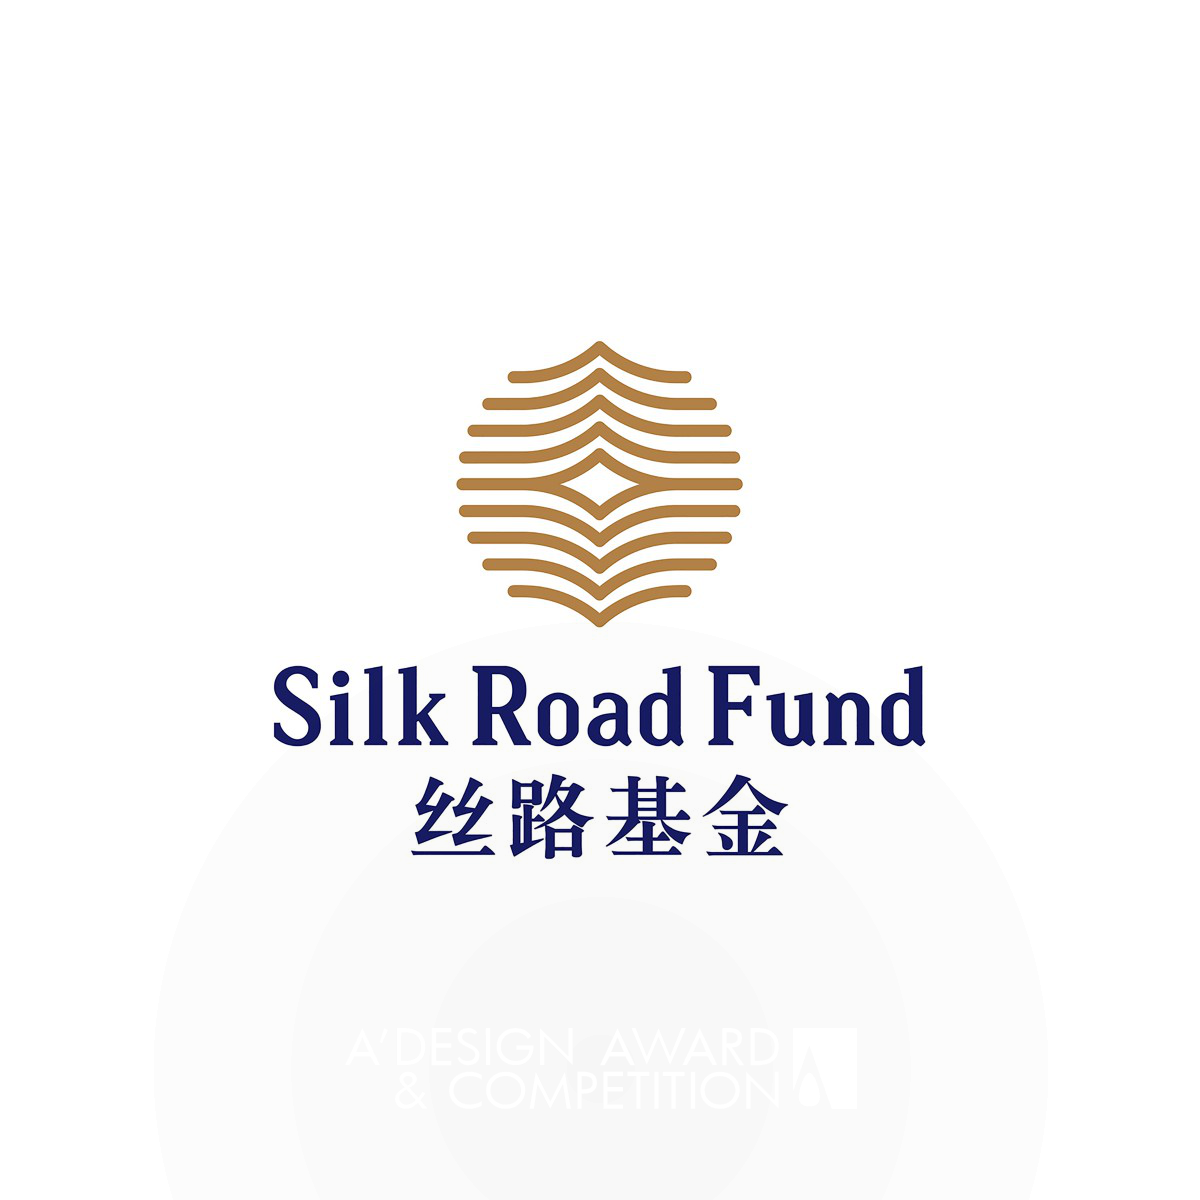 Silk Road Fund Logo and VI by Dongdao Creative Branding Group Iron Graphics, Illustration and Visual Communication Design Award Winner 2017 